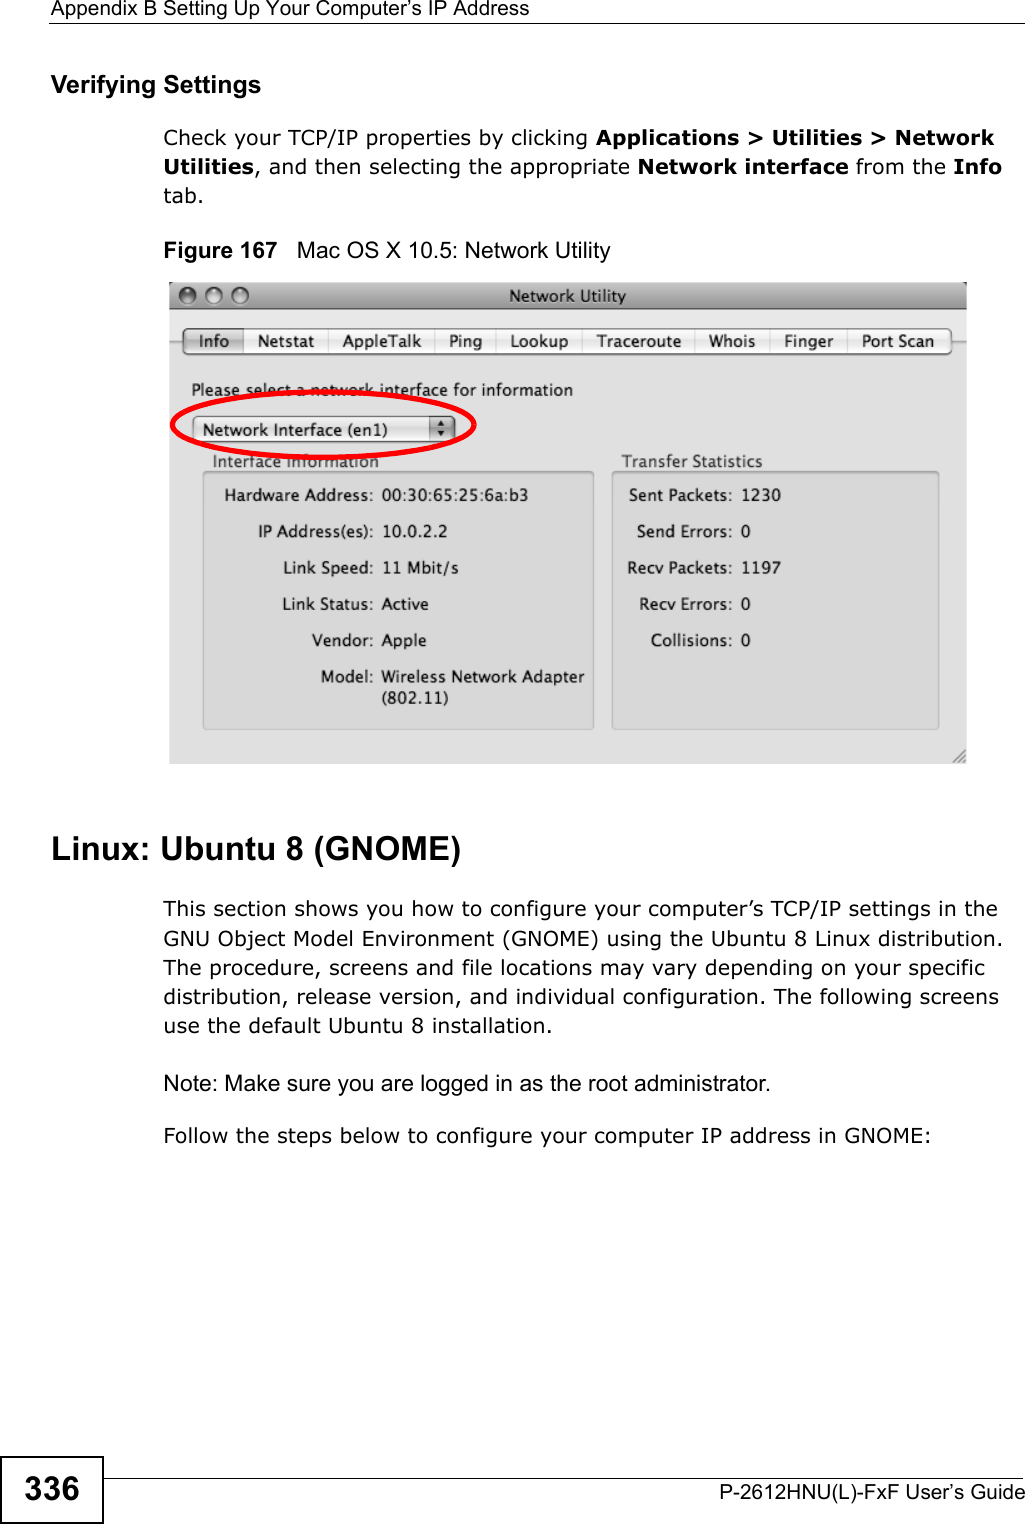 Appendix B Setting Up Your Computer’s IP AddressP-2612HNU(L)-FxF User’s Guide336Verifying SettingsCheck your TCP/IP properties by clicking Applications &gt; Utilities &gt; Network Utilities, and then selecting the appropriate Network interface from the Infotab.Figure 167   Mac OS X 10.5: Network UtilityLinux: Ubuntu 8 (GNOME)This section shows you how to configure your computer’s TCP/IP settings in the GNU Object Model Environment (GNOME) using the Ubuntu 8 Linux distribution. The procedure, screens and file locations may vary depending on your specificdistribution, release version, and individual configuration. The following screens use the default Ubuntu 8 installation.Note: Make sure you are logged in as the root administrator.Follow the steps below to configure your computer IP address in GNOME: